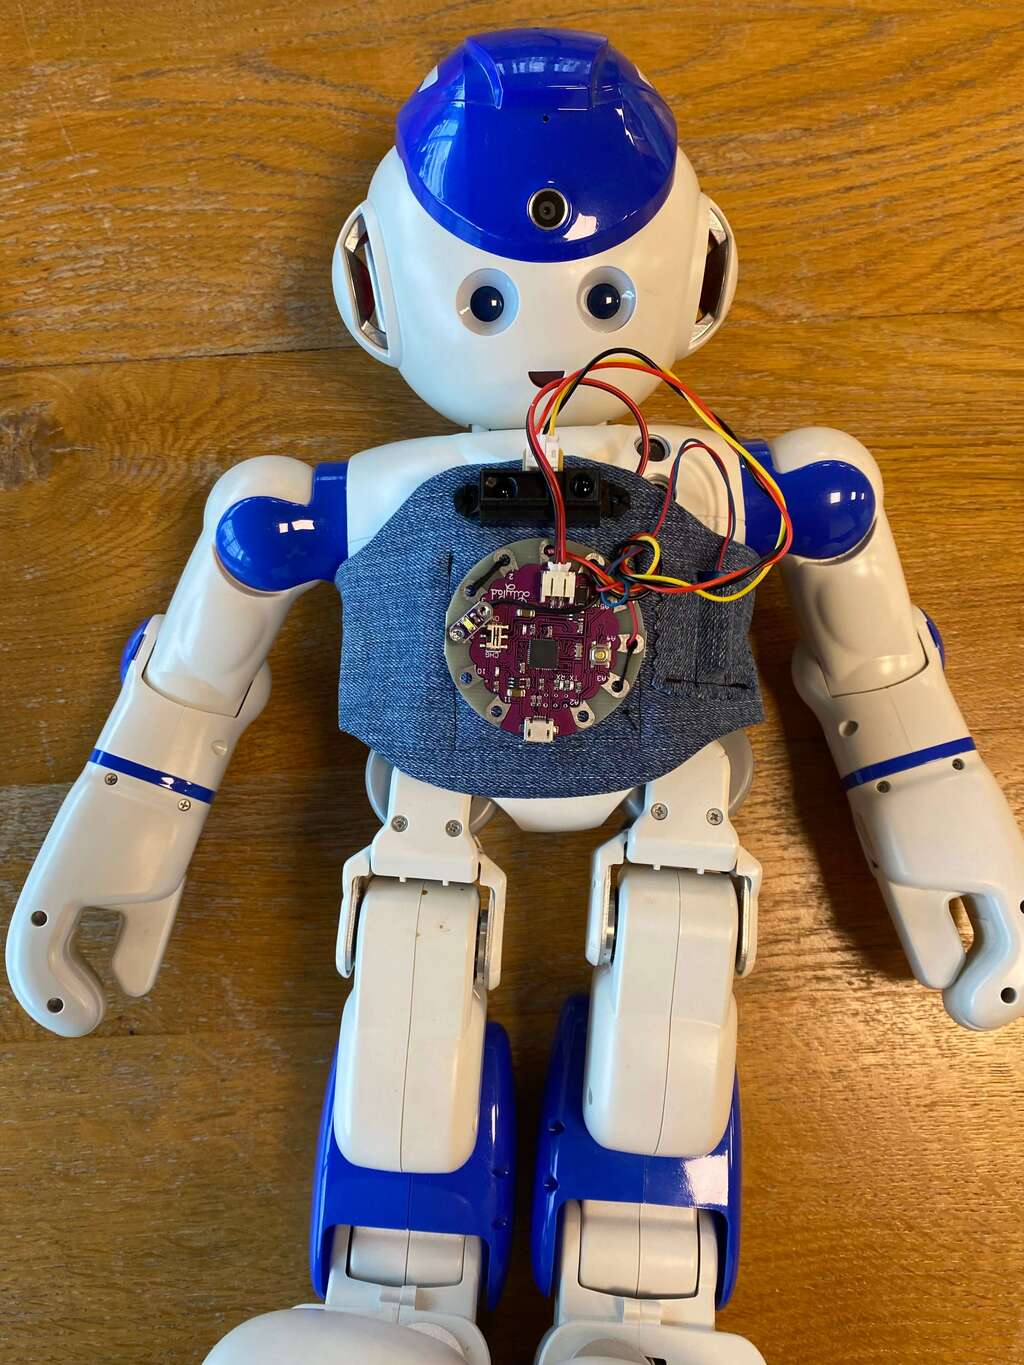 Robot with heart rate and sensor